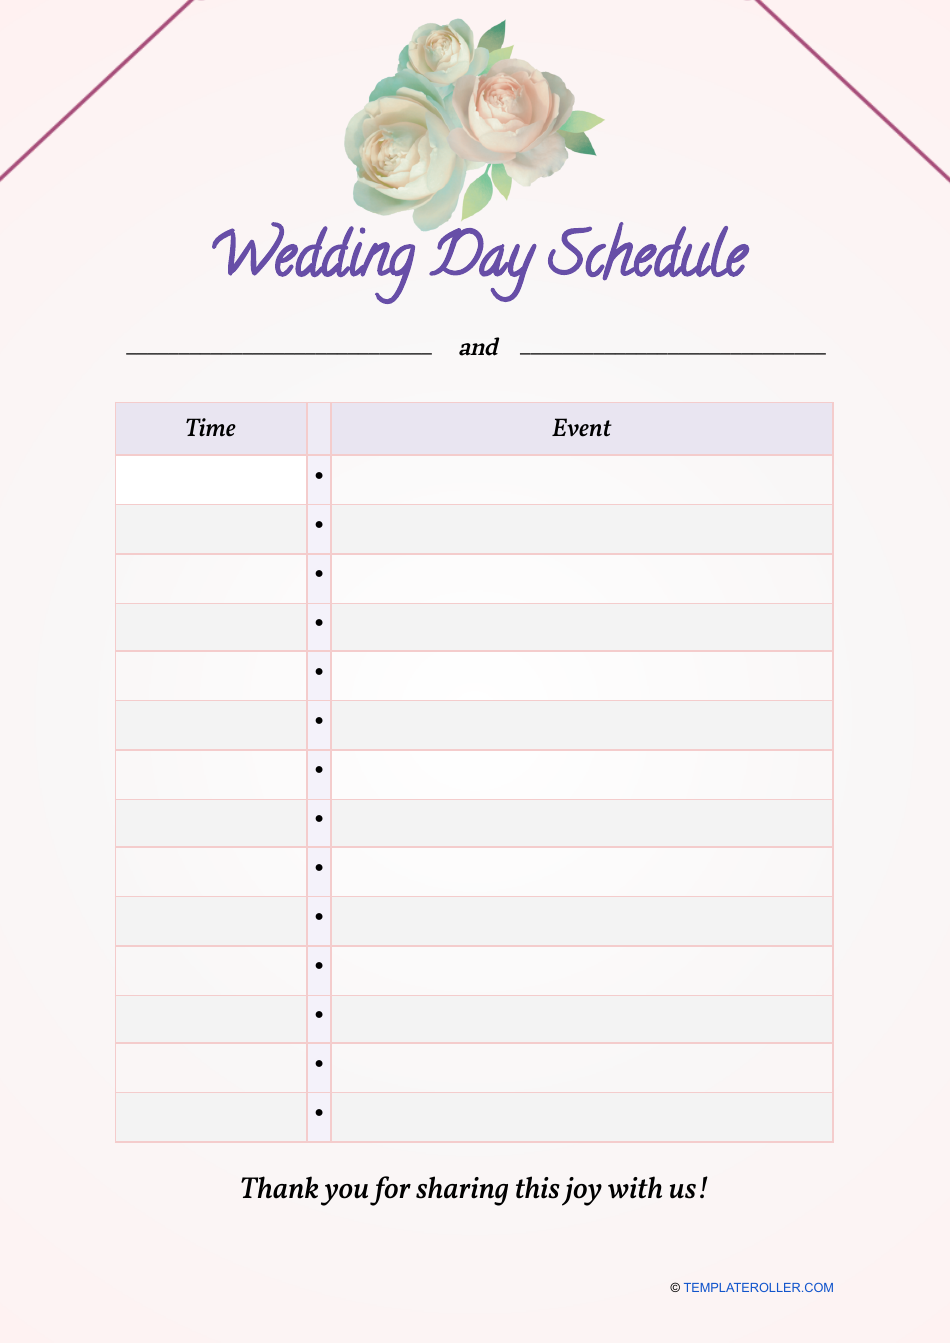 Wedding Day Schedule Template - Roses